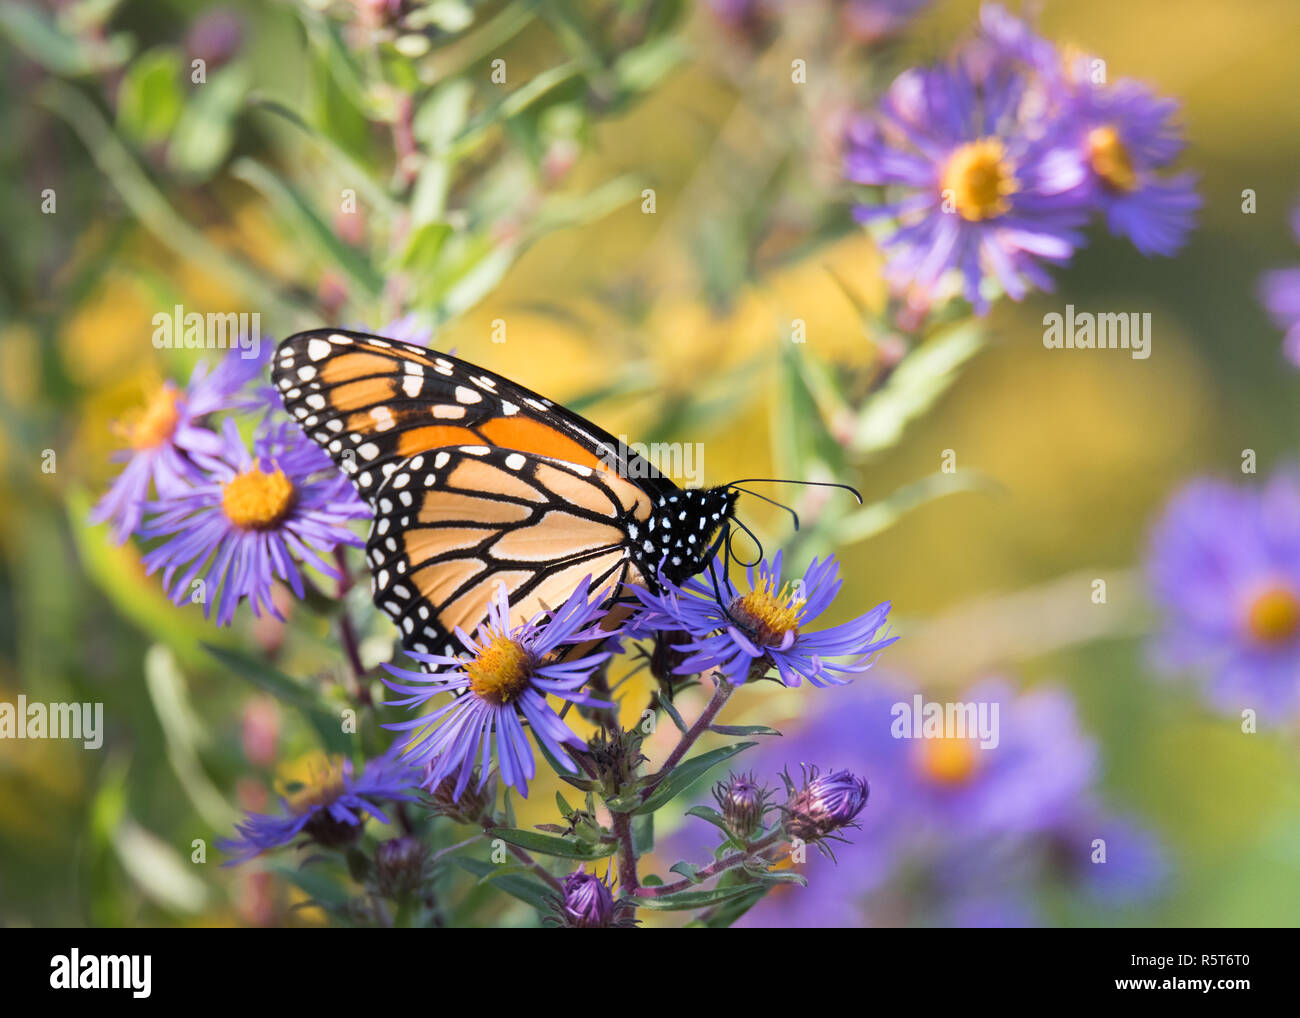 A Monarch butterfly (Danaus plexippus) perched on New England Aster (Symphyotrichum novae-angliae) at Humber Bay Park in Toronto, Ontario, Canada. Stock Photo